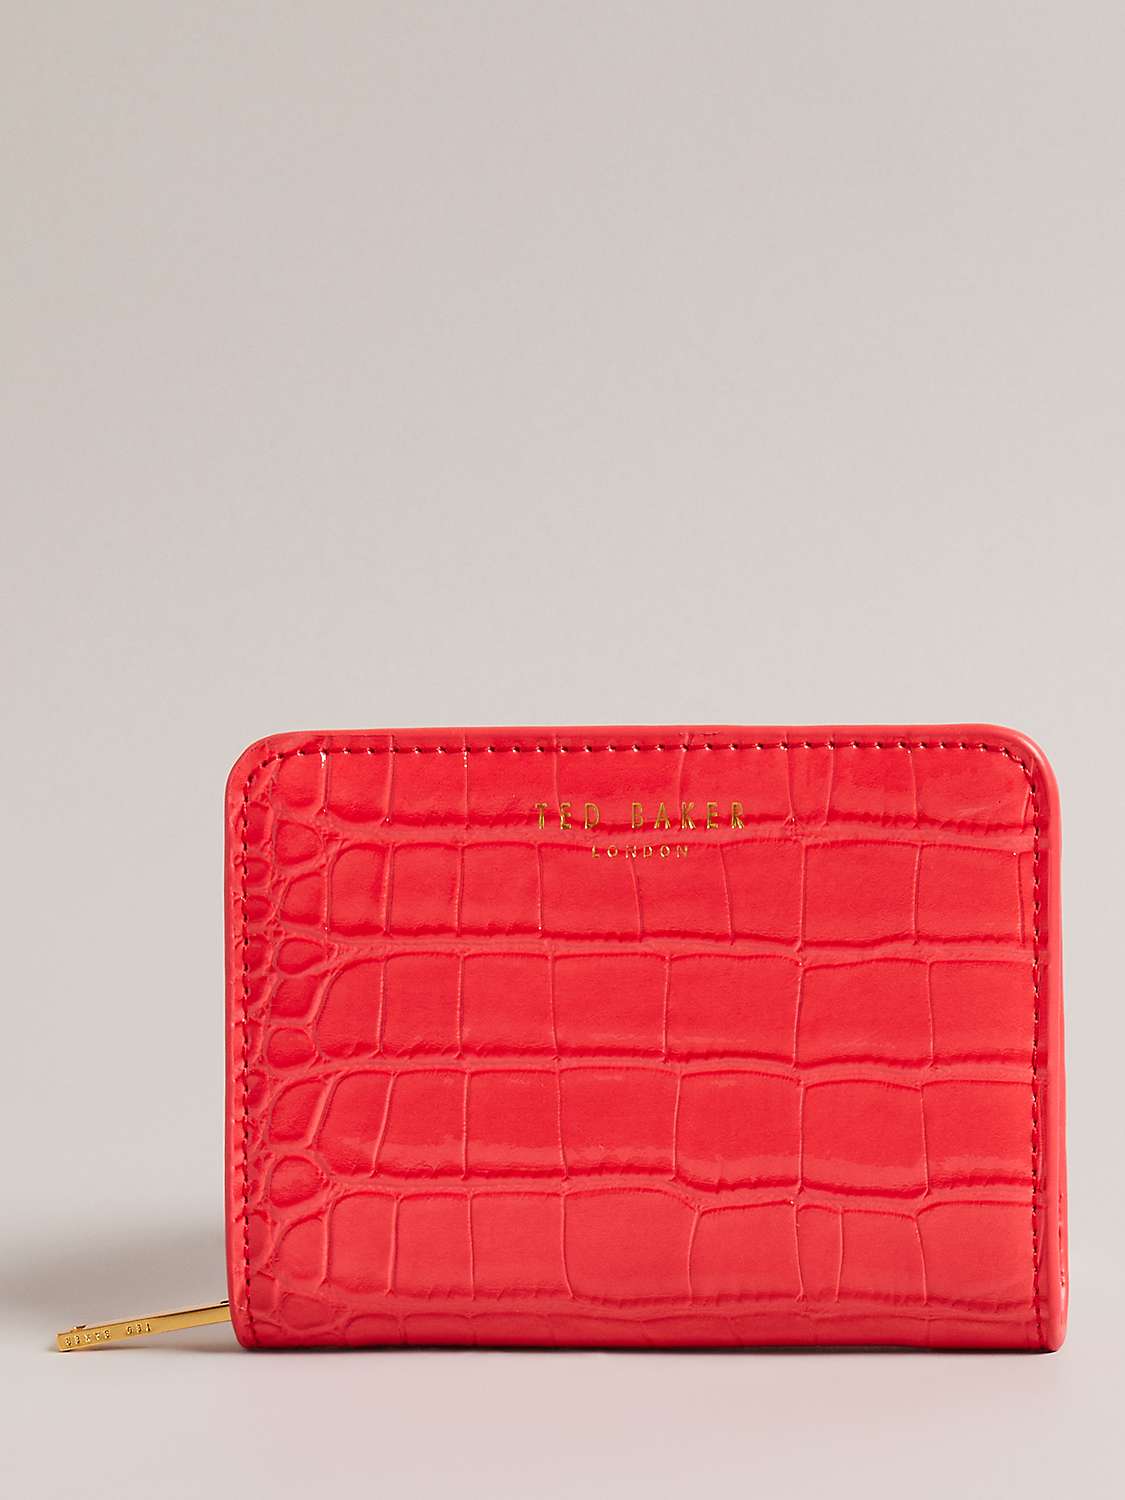 Ted Baker Valense Croc Effect Small Purse, Orange Coral at John Lewis ...